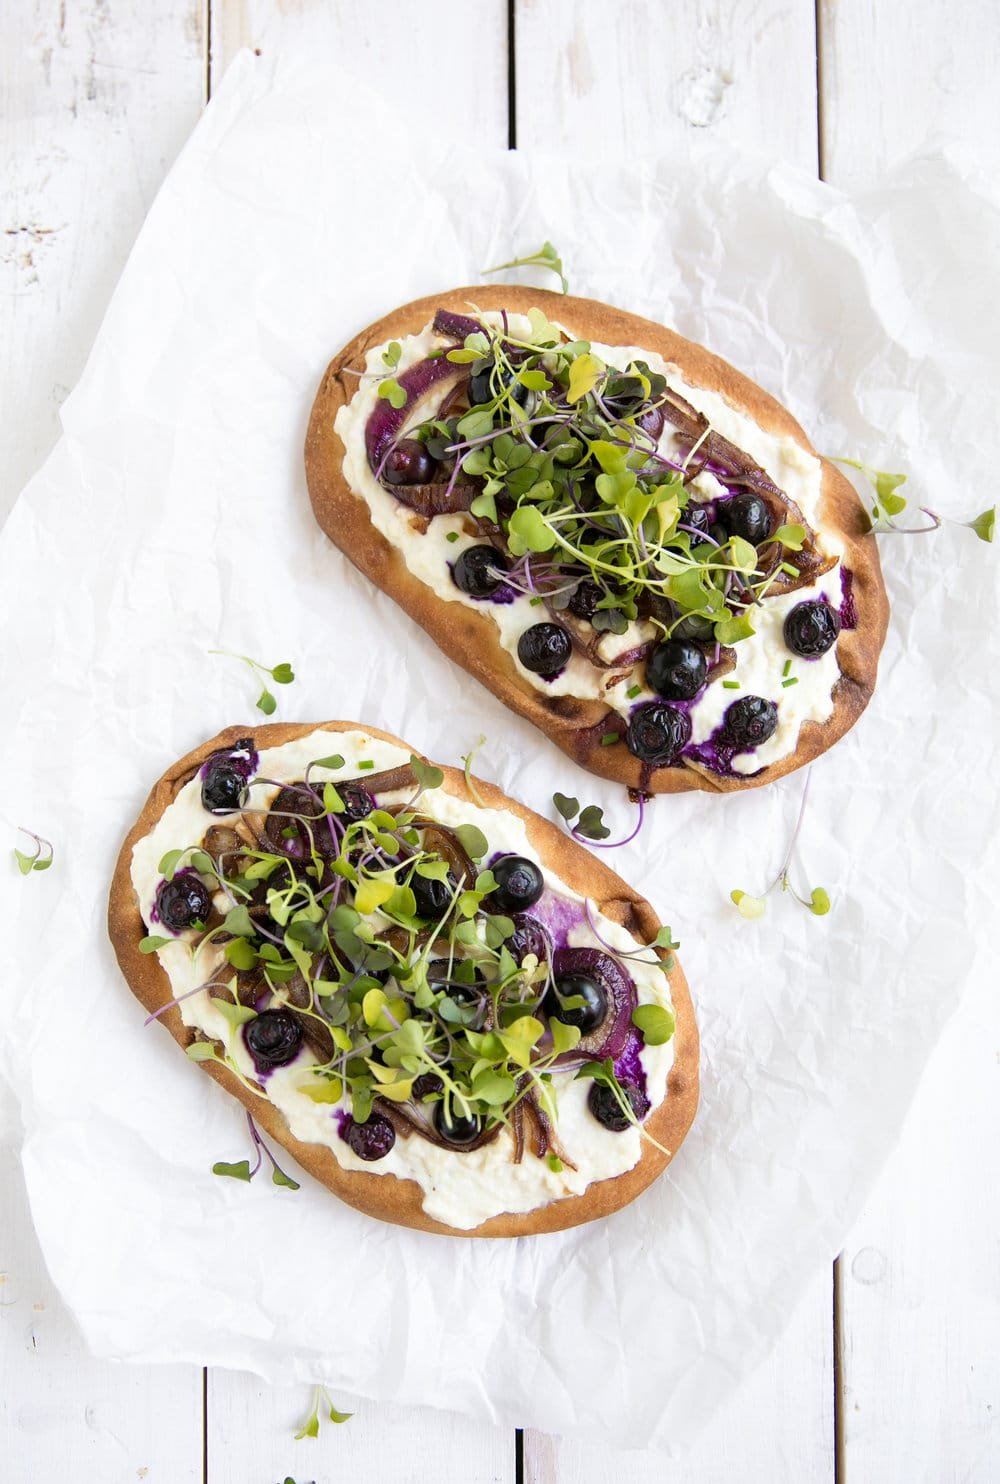 Blueberry and Honey Caramelized Onion Naan Pizza with greens sprinkled